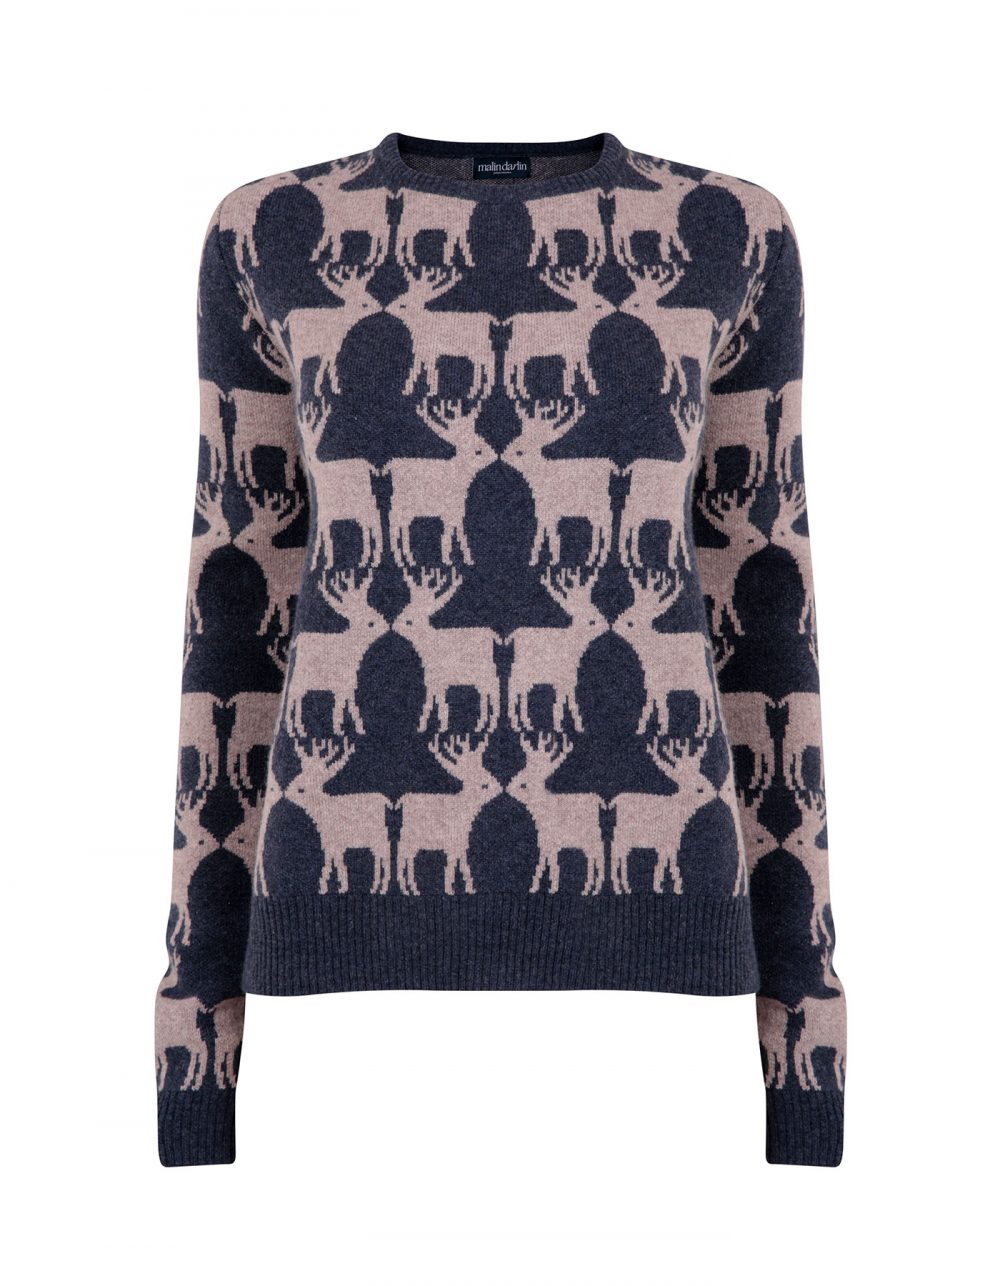 Image of a cashmere jumper with navy reindeers knitted into the design.